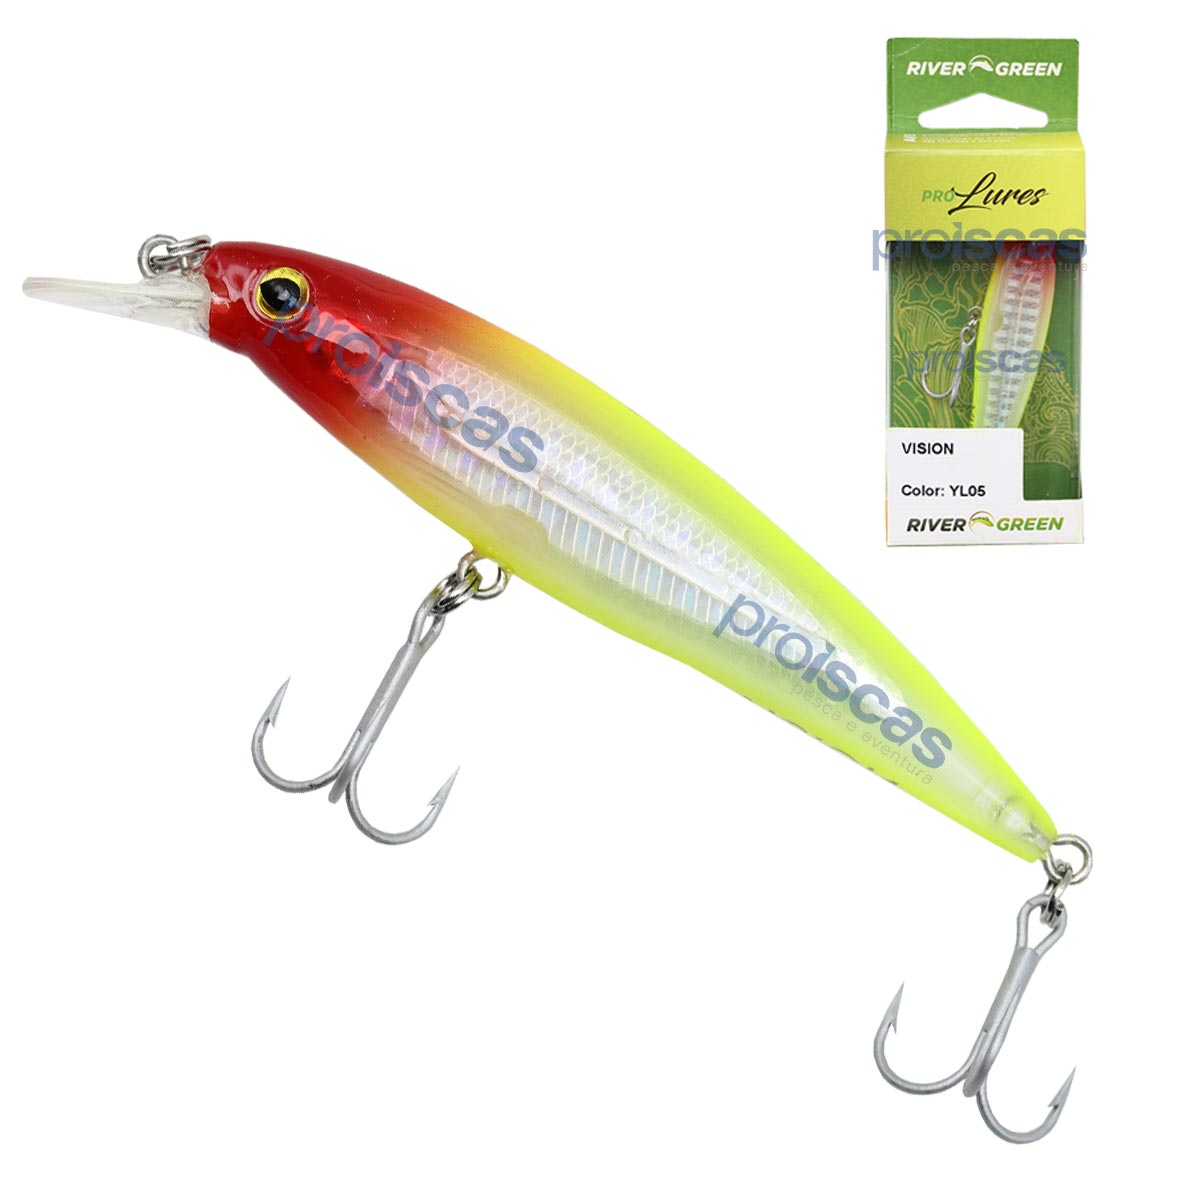 Isca Artificial River Green Pro Lures Vision - 8cm 7g